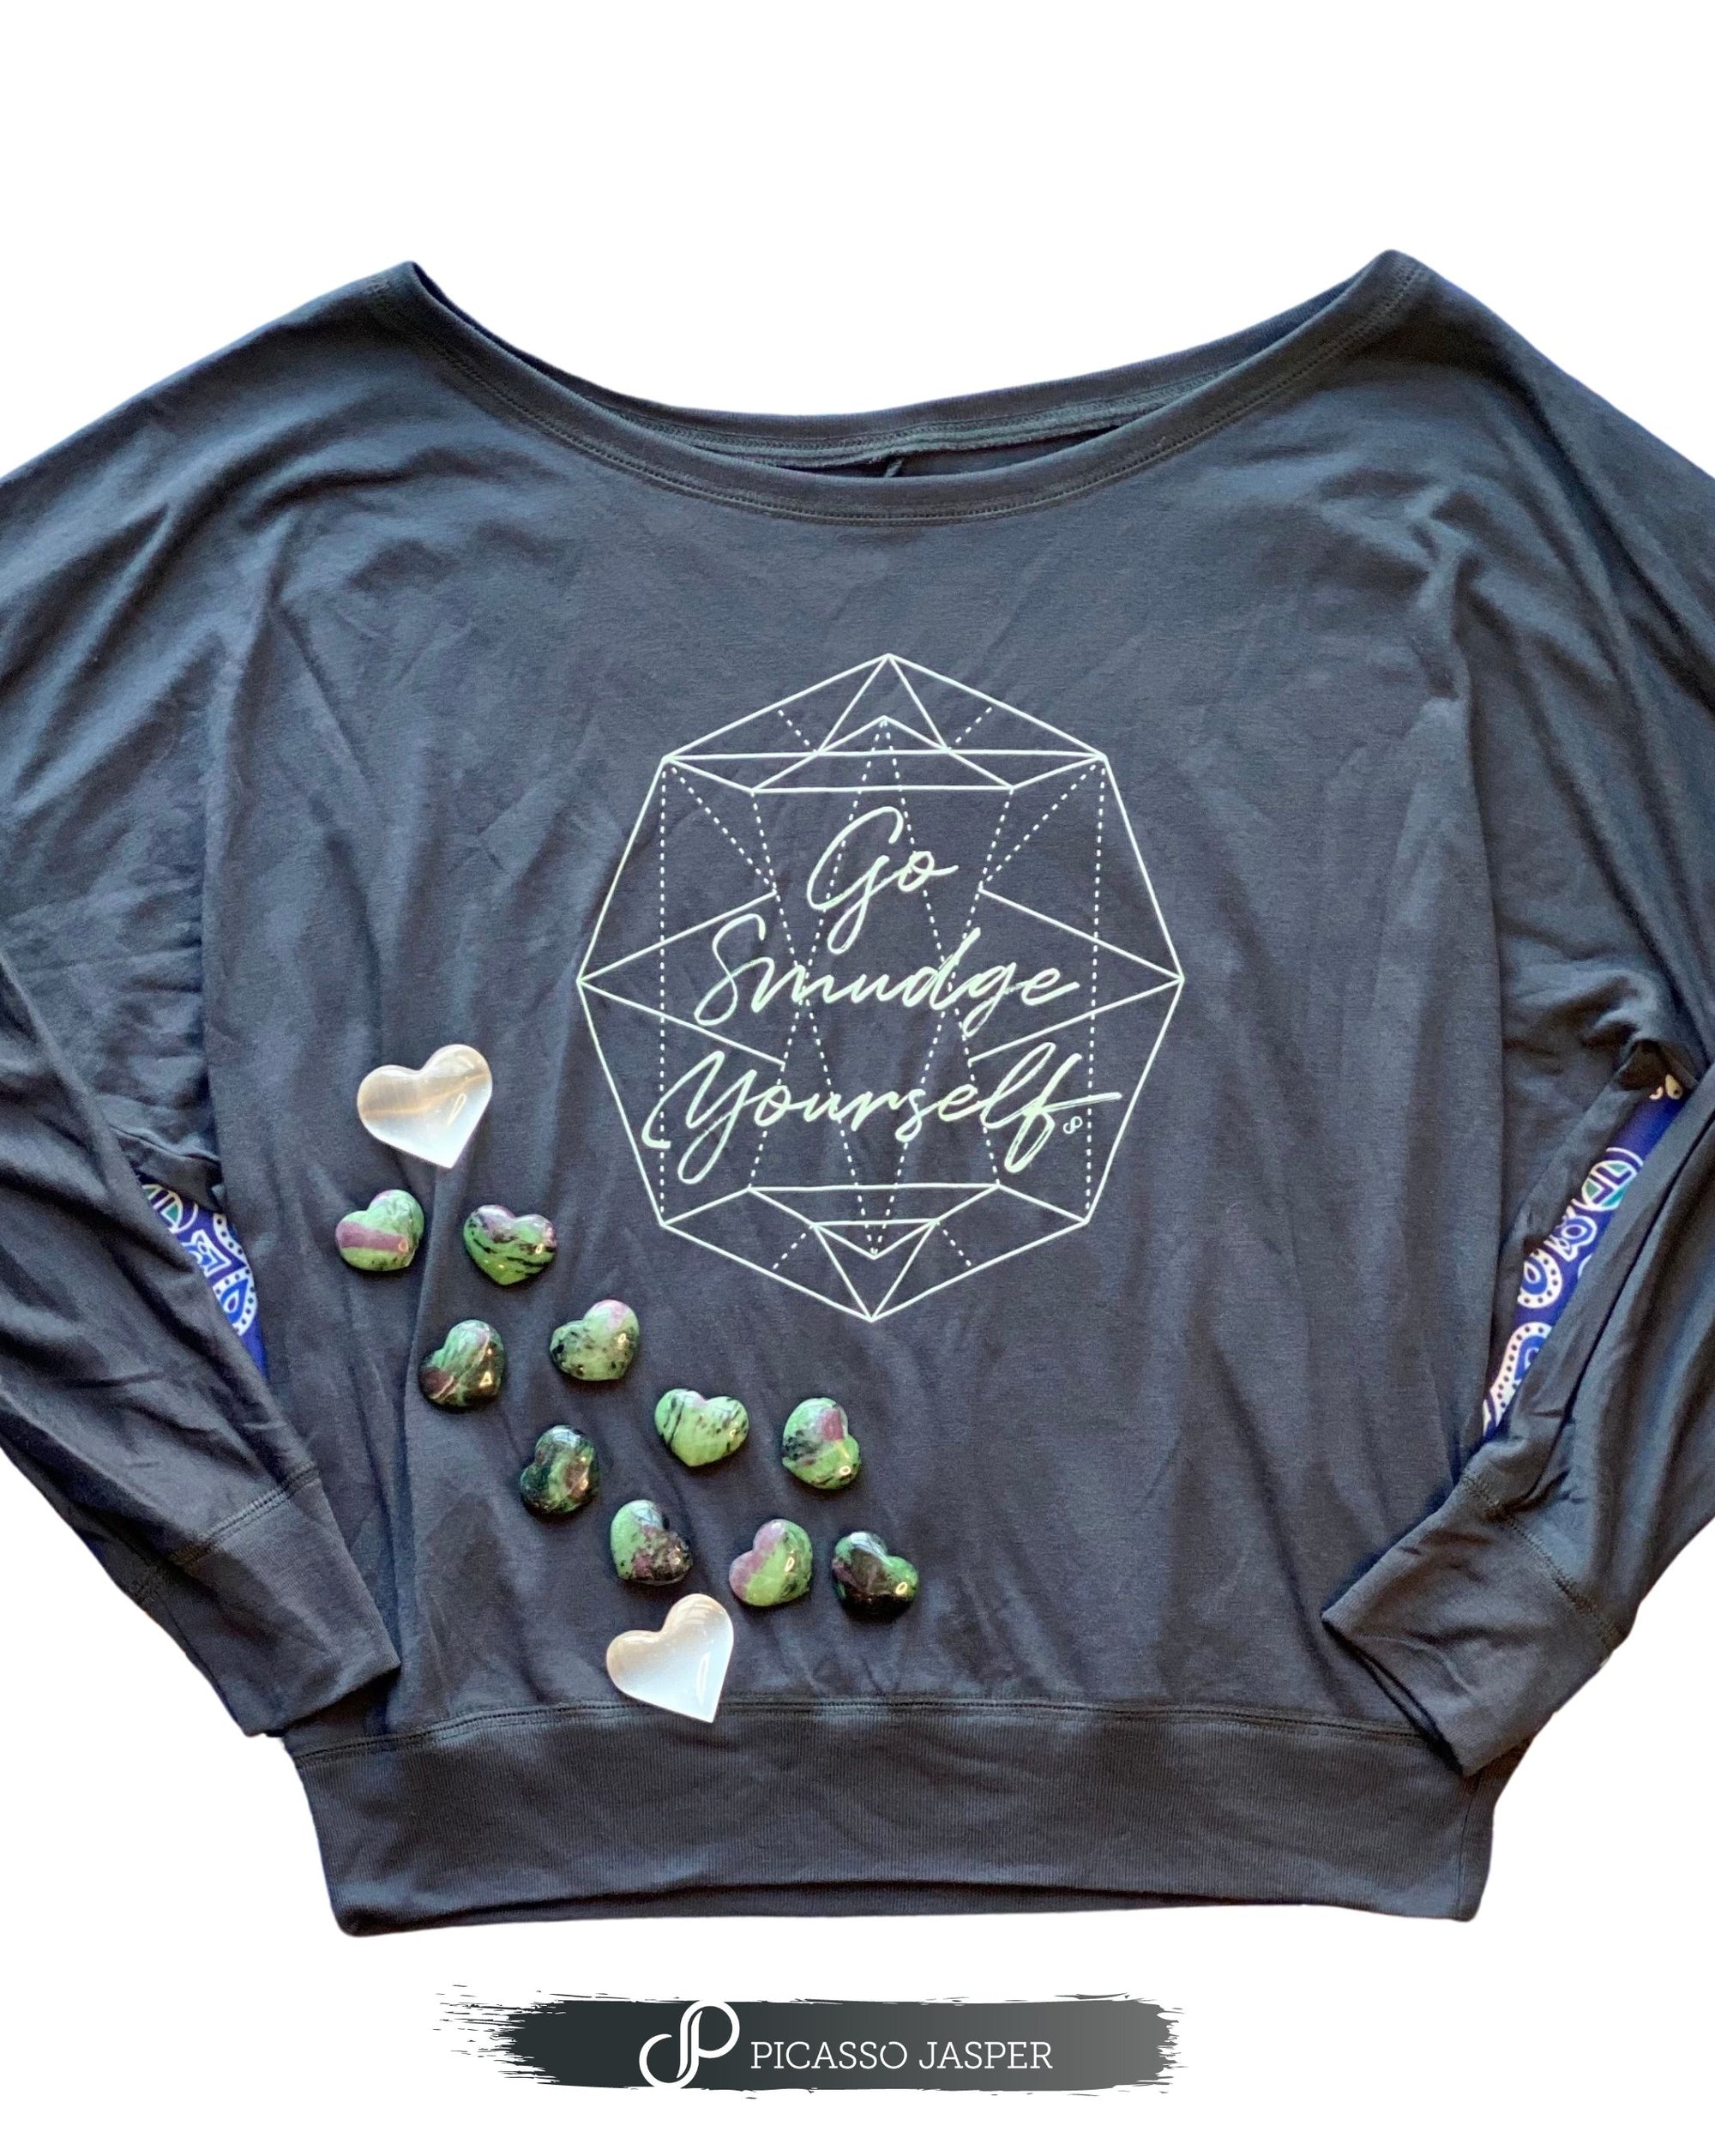 Small ONLY! Go Smudge Yourself, Stone Gray Long Sleeve Tee